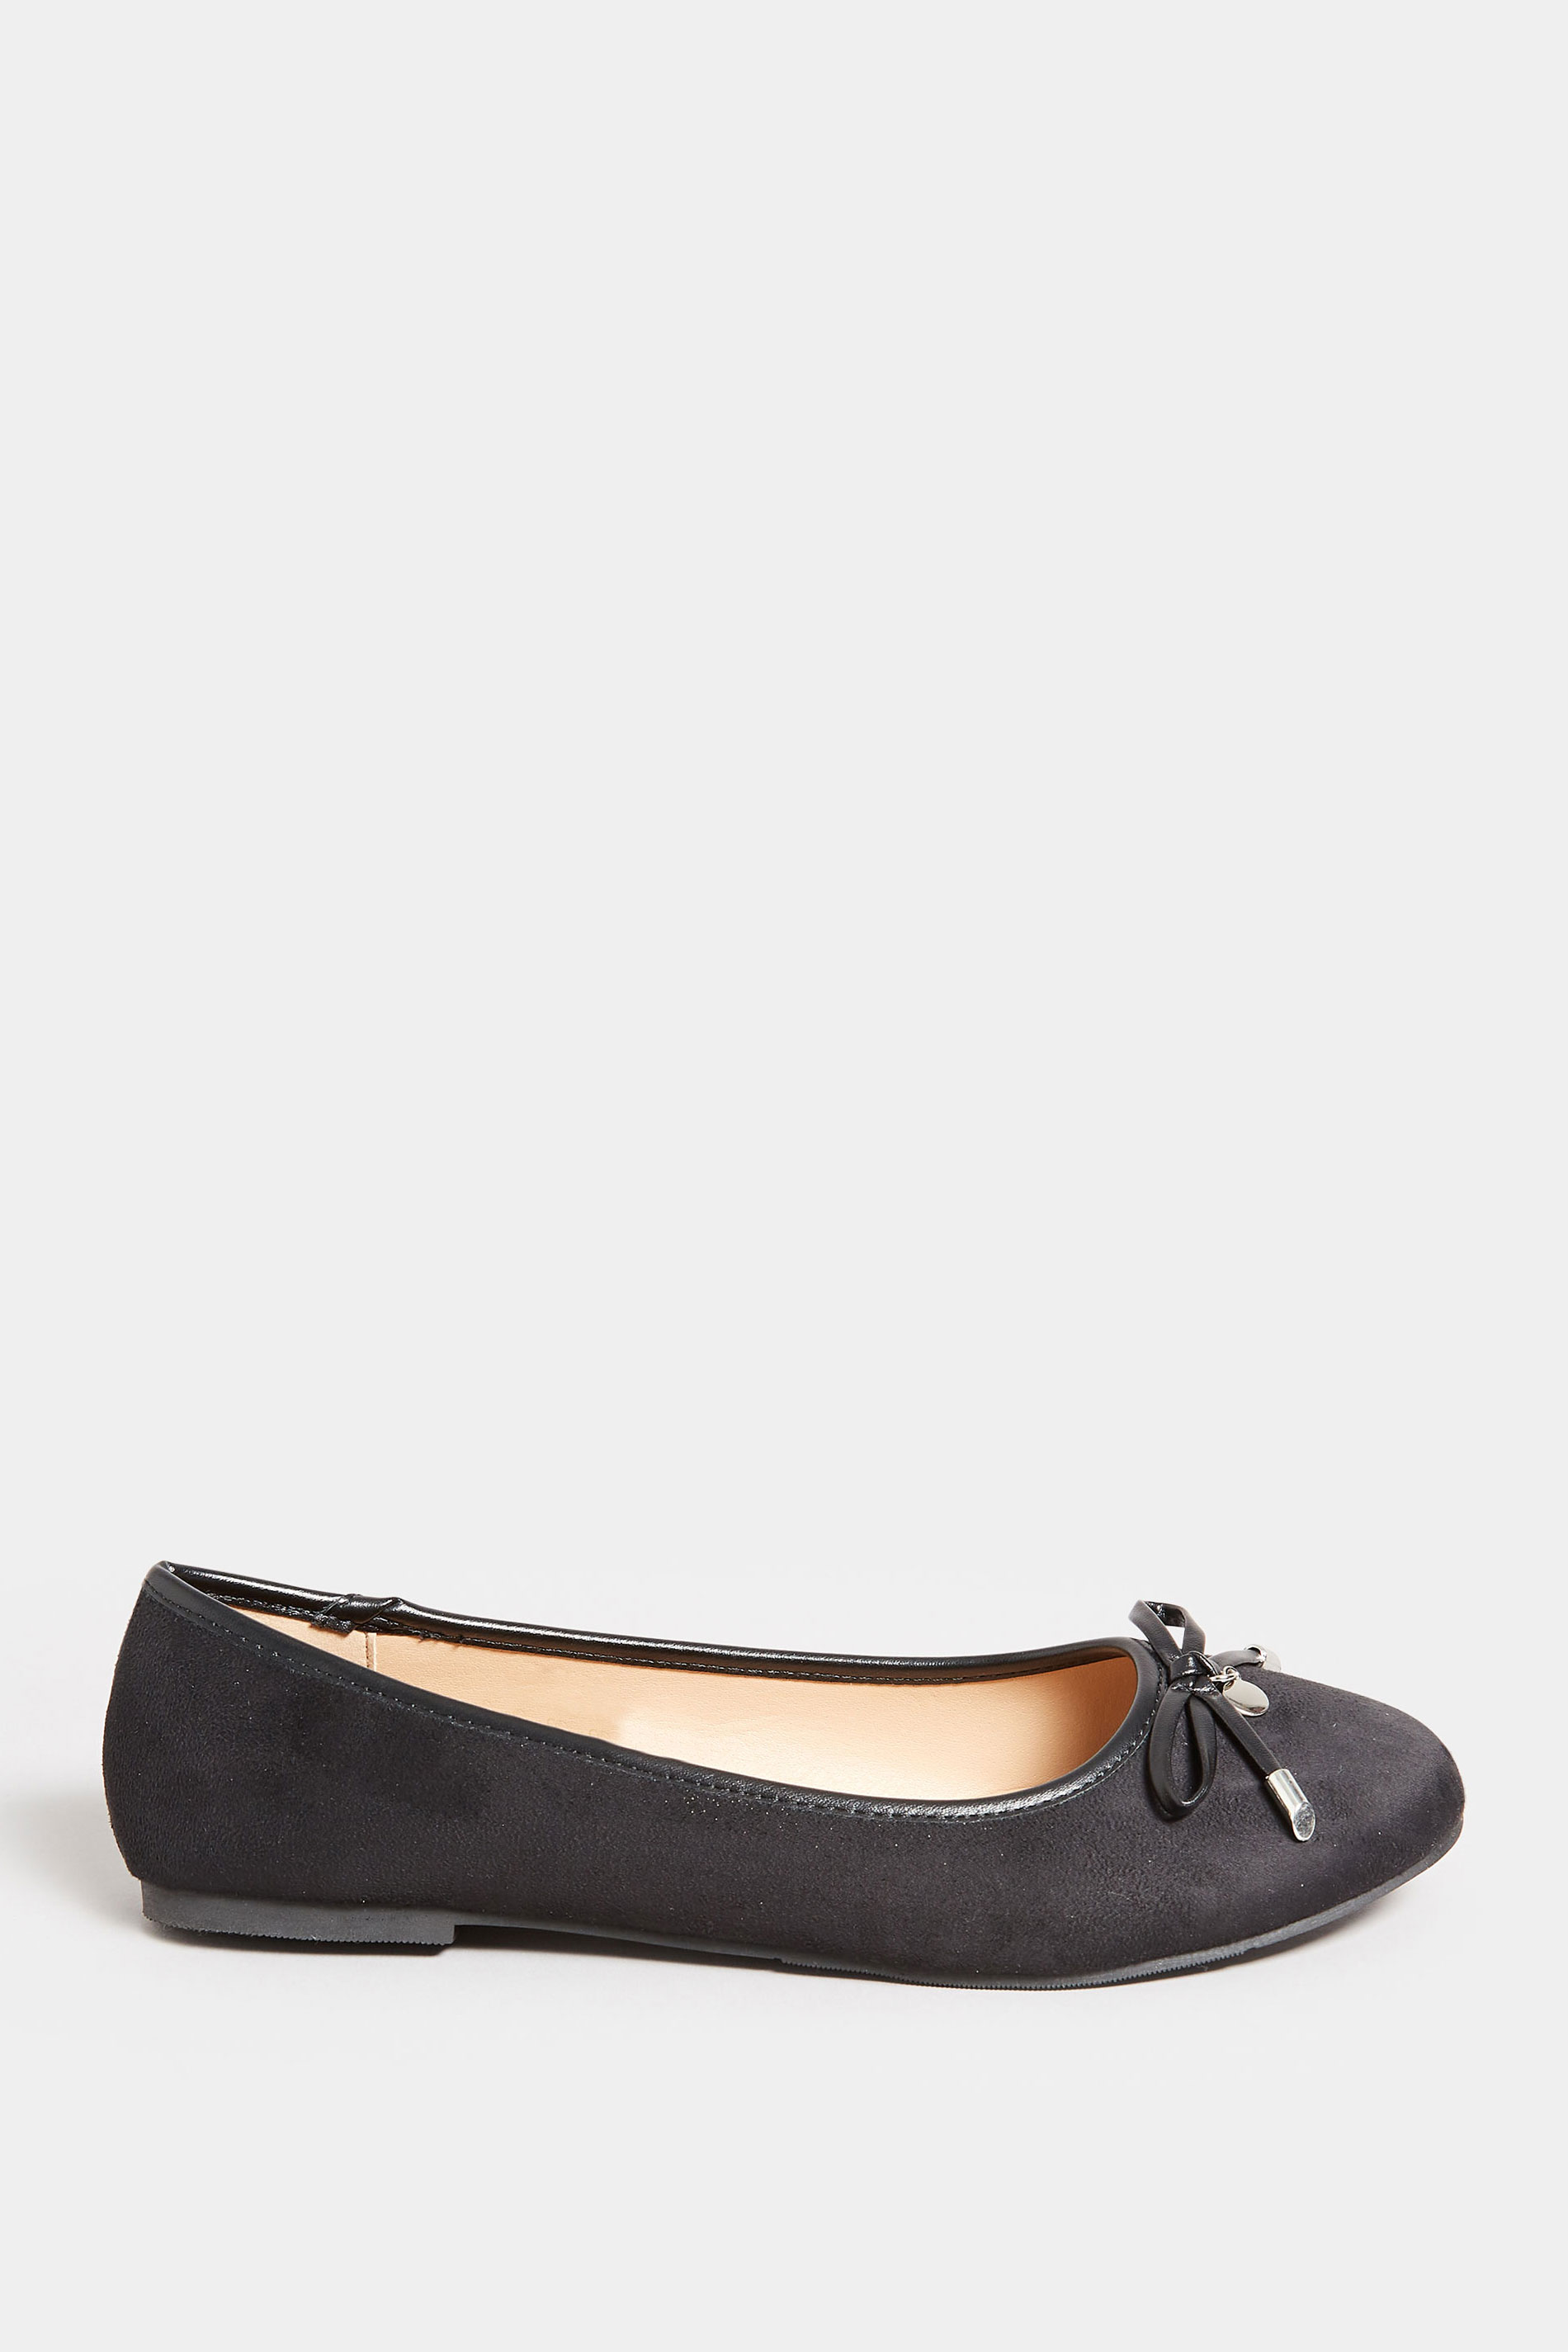 LTS Black Faux Suede Ballerina Pumps In Standard Fit | Long Tall Sally 3